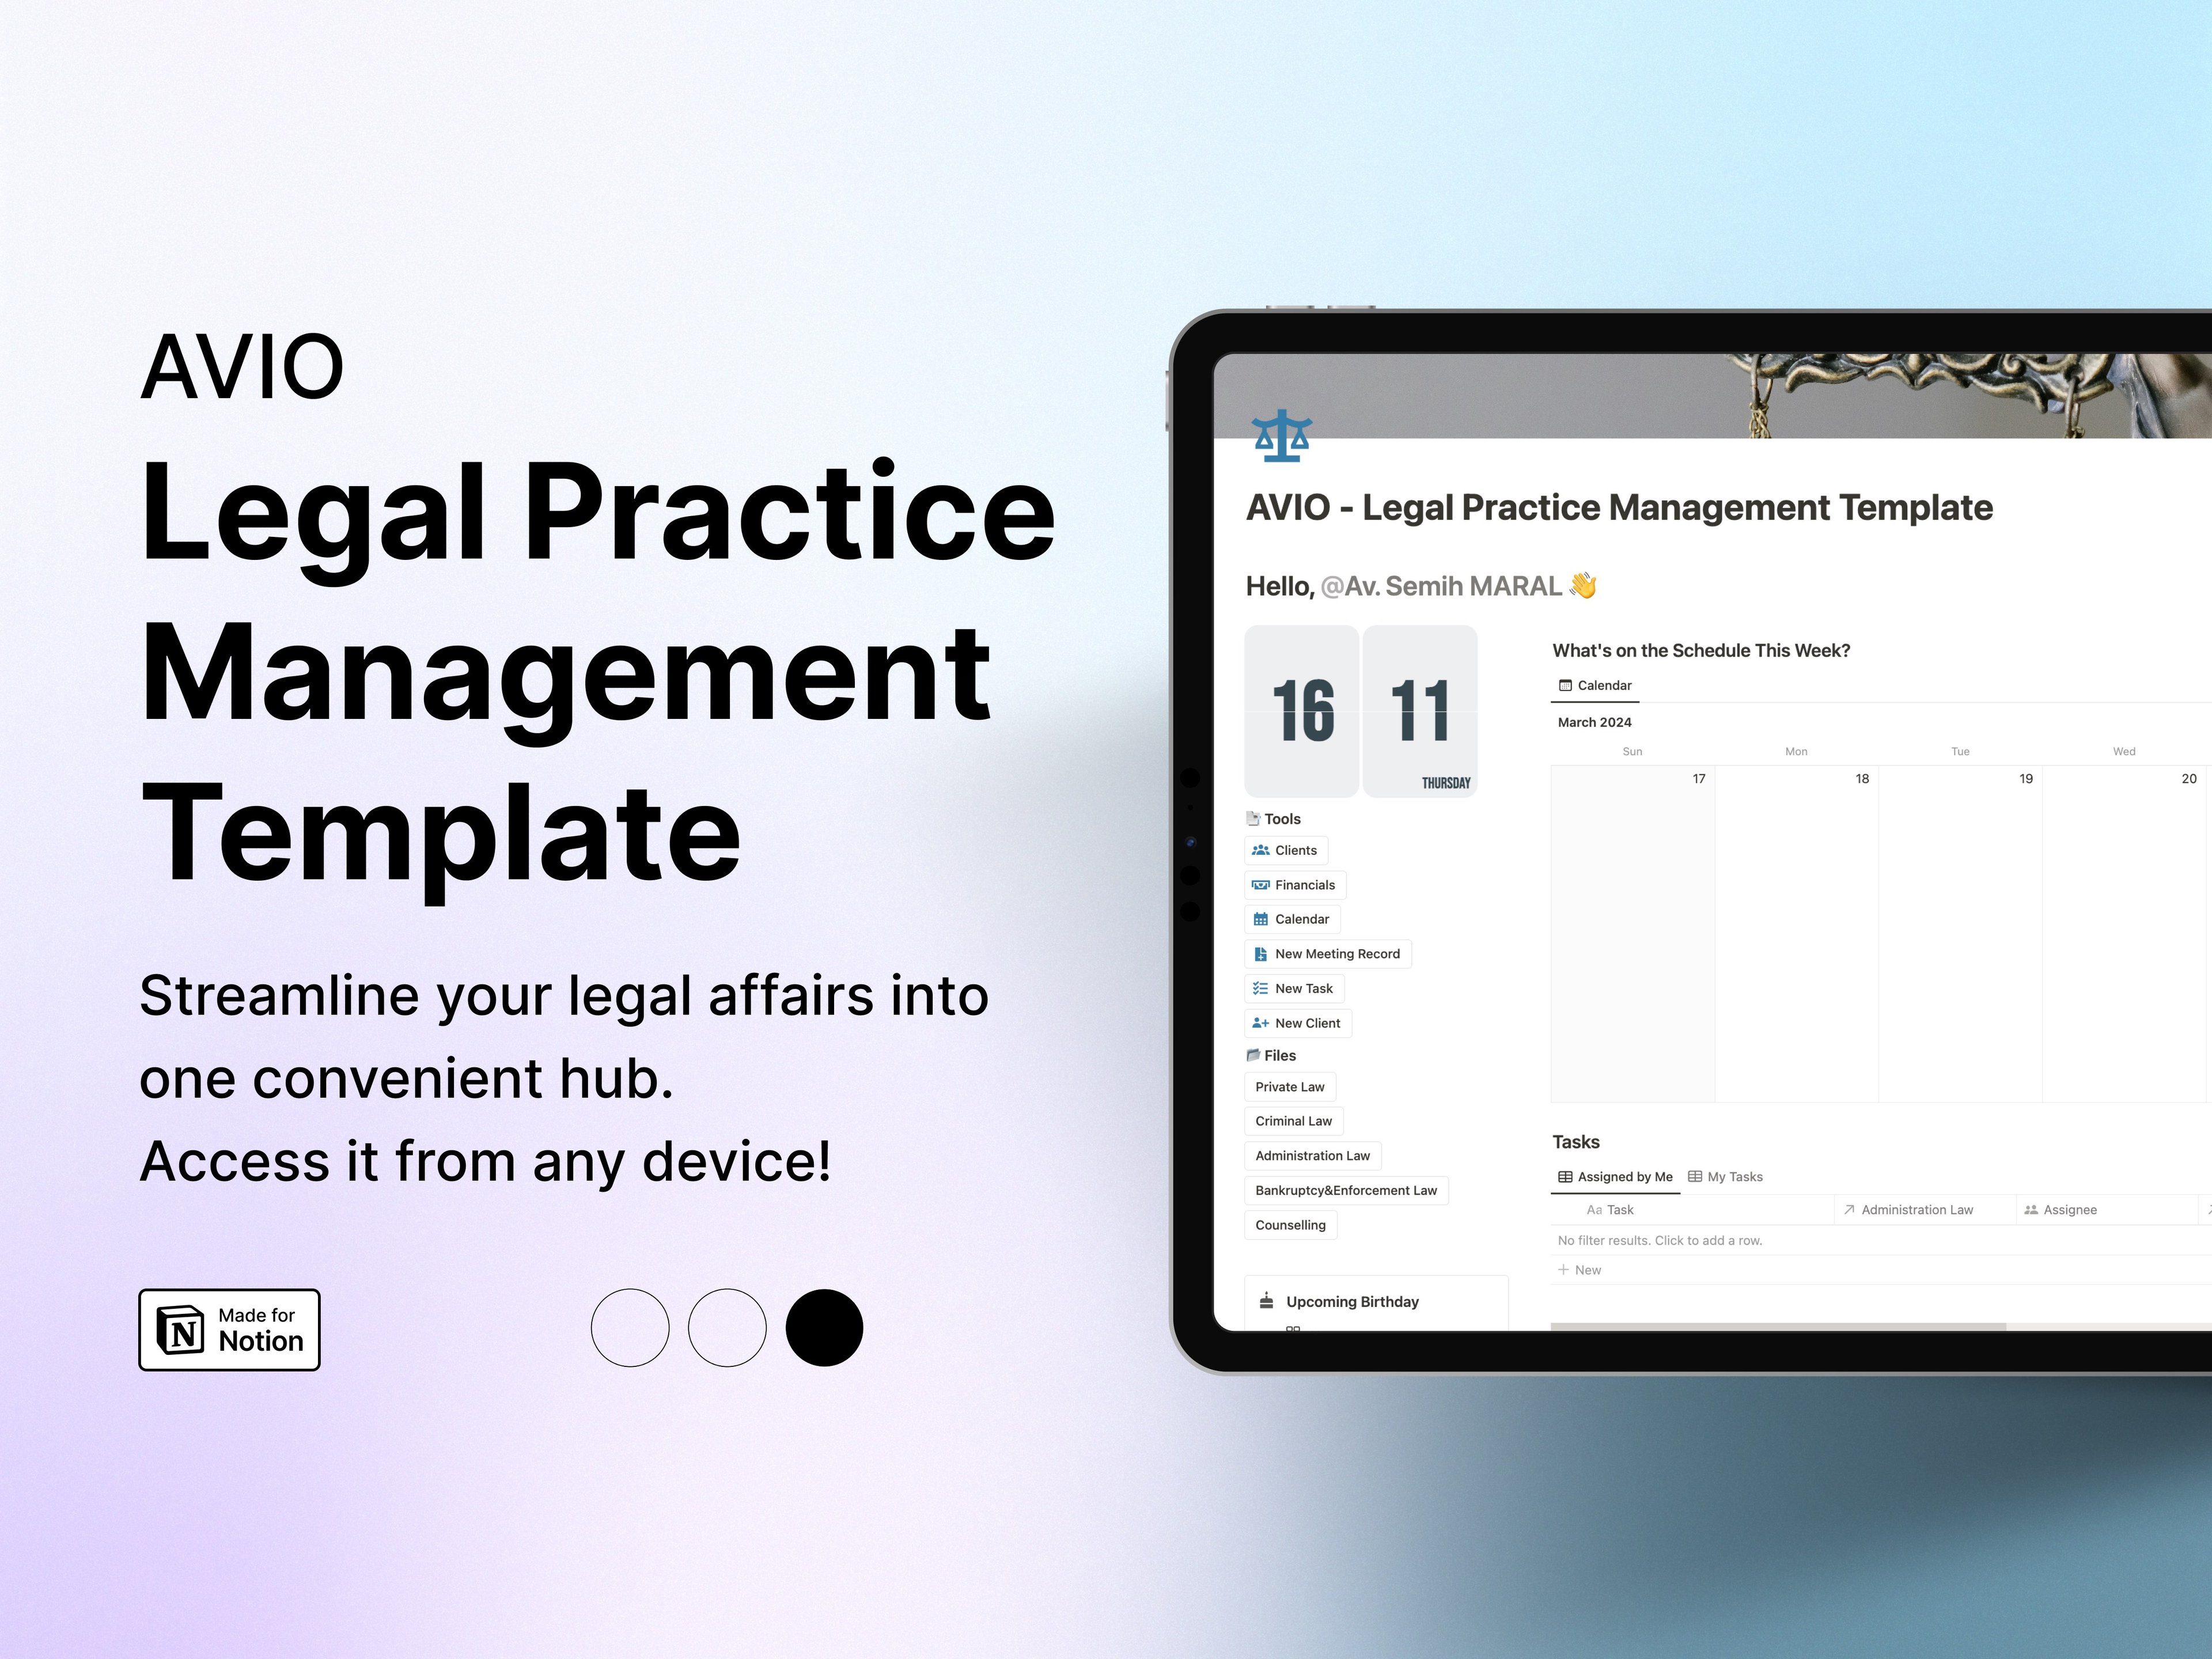 Elevate your legal practice with our Notion template. Streamline client management, track cases, sync calendars, and automate tasks. Explore now!